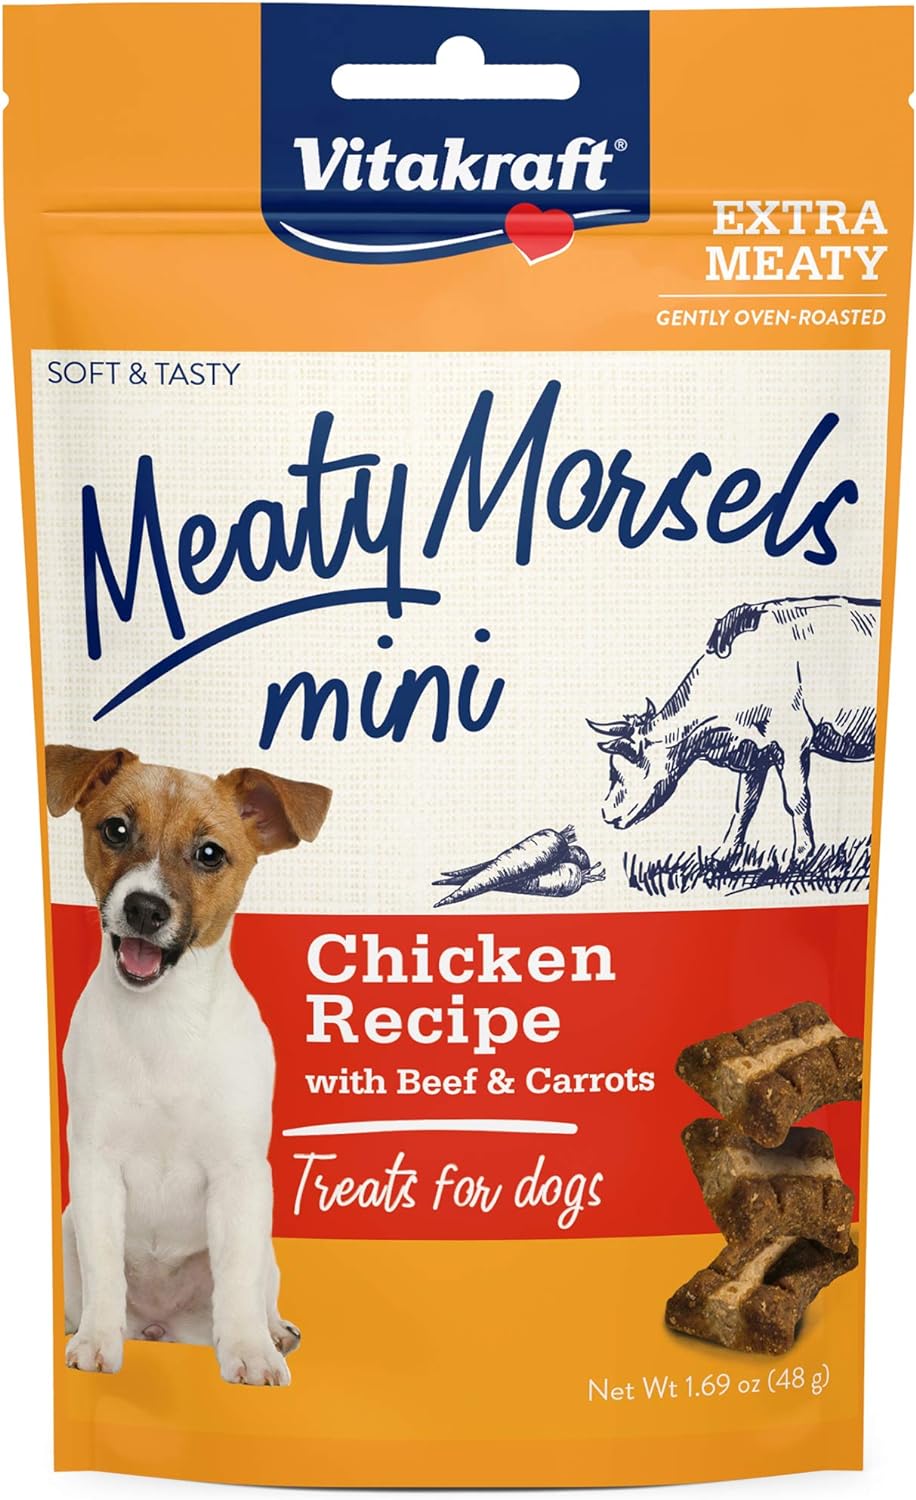 Vitakraft Meaty Morsels Mini Treats for Dogs - Chicken with Beef and Carrots - Super Soft Dog Treats for Training - Two Layers of Gently Oven-Baked Meaty Goodness